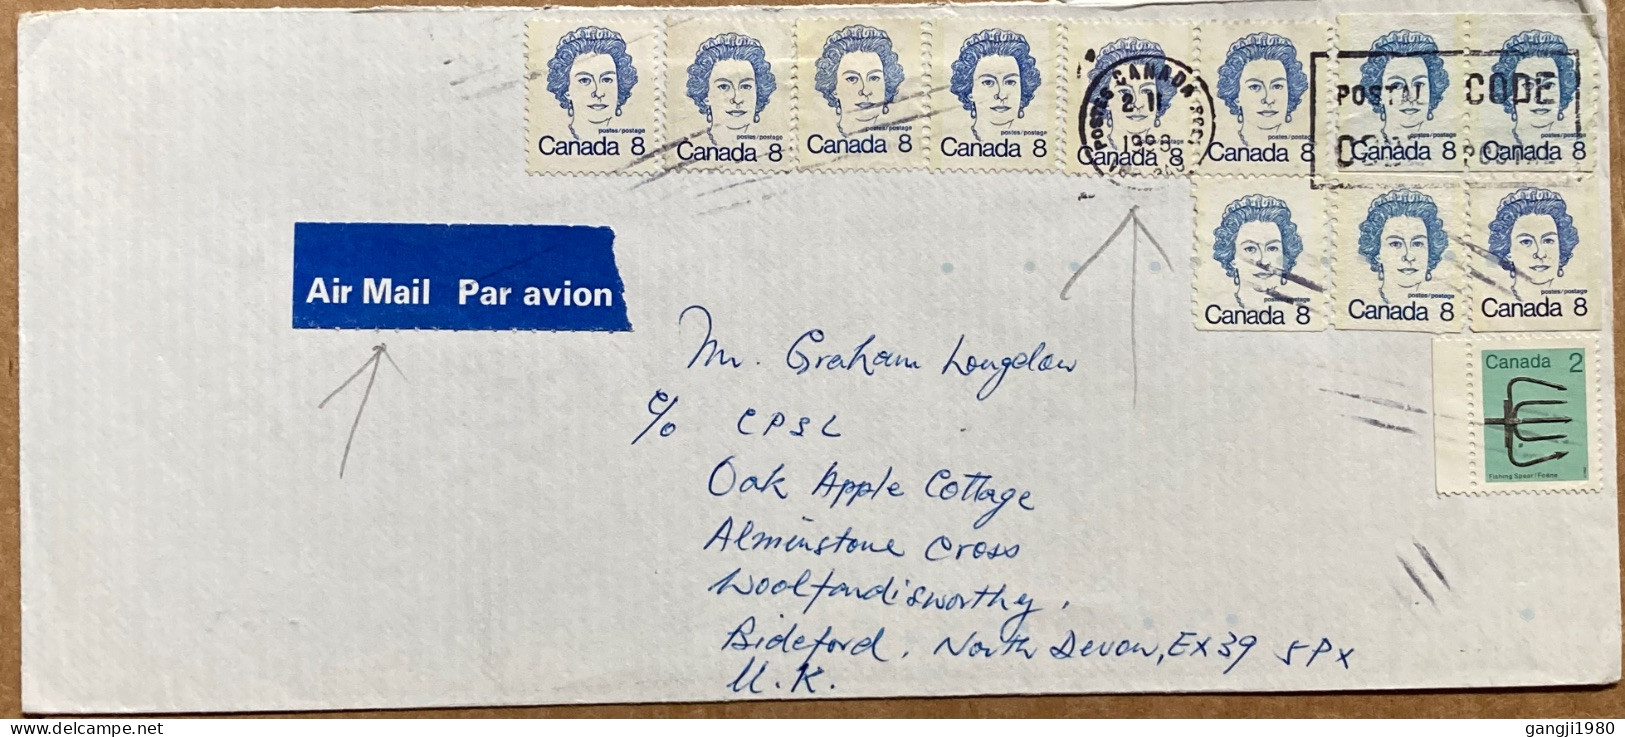 CANADA 1988, COVER USED TO ENGLAND, MULTI 12 STAMP, QUEEN & FISHING SPEAR, POST CODE, MACHINE SLOGAN CANCEL. - Storia Postale